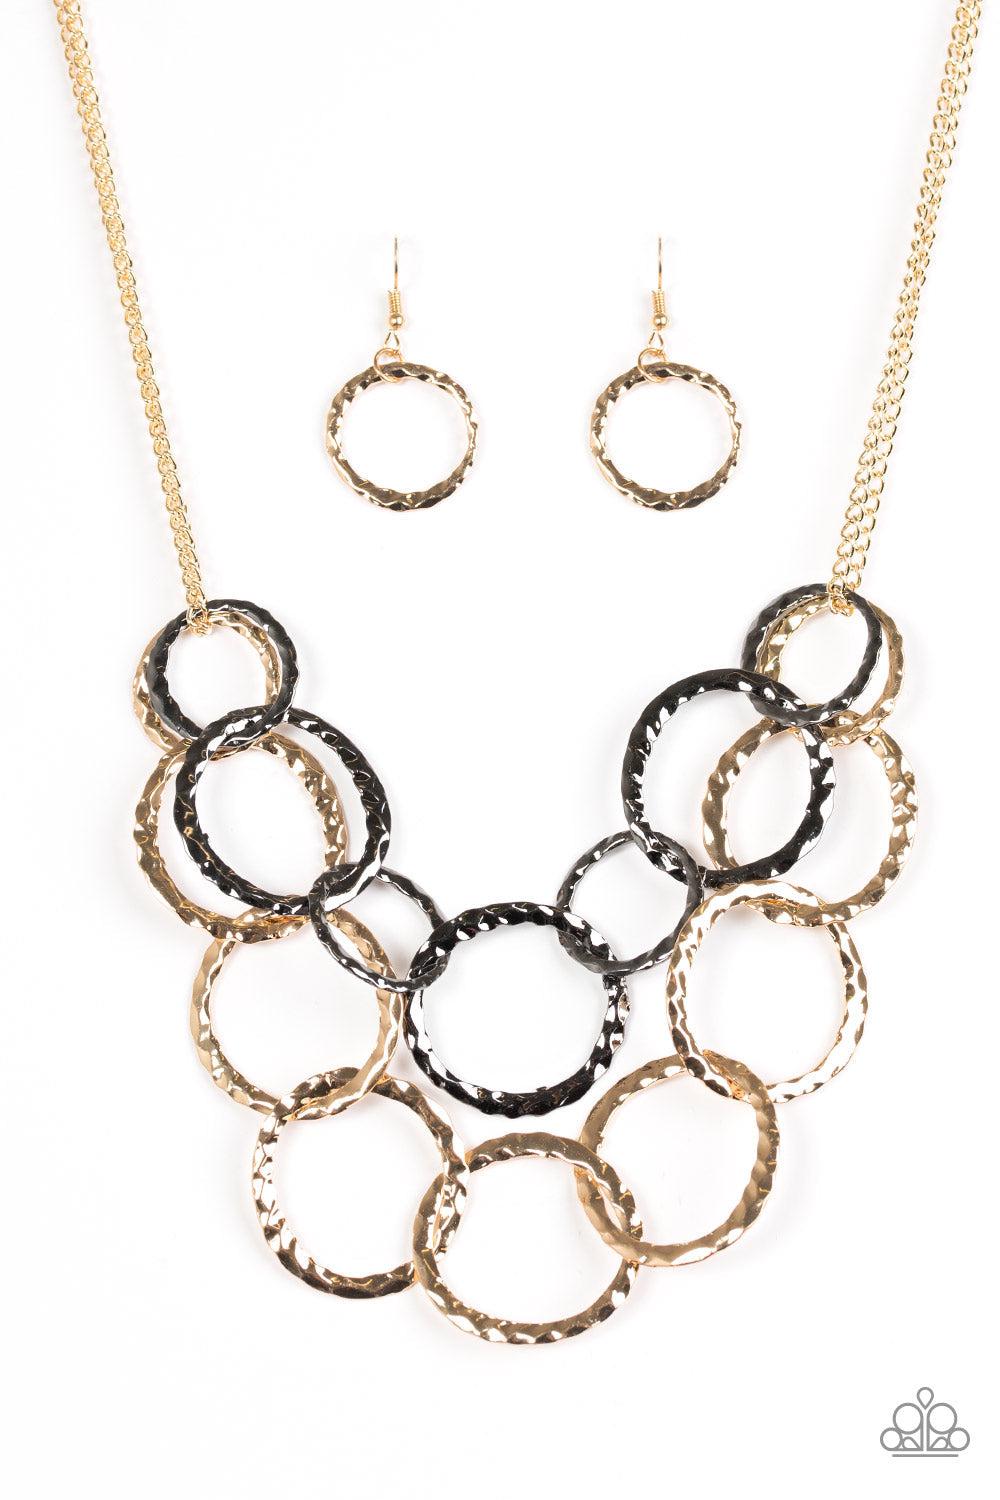 Radiant Ringmaster Multi Gold &amp; Gunmetal Necklace - Paparazzi Accessories- lightbox - CarasShop.com - $5 Jewelry by Cara Jewels